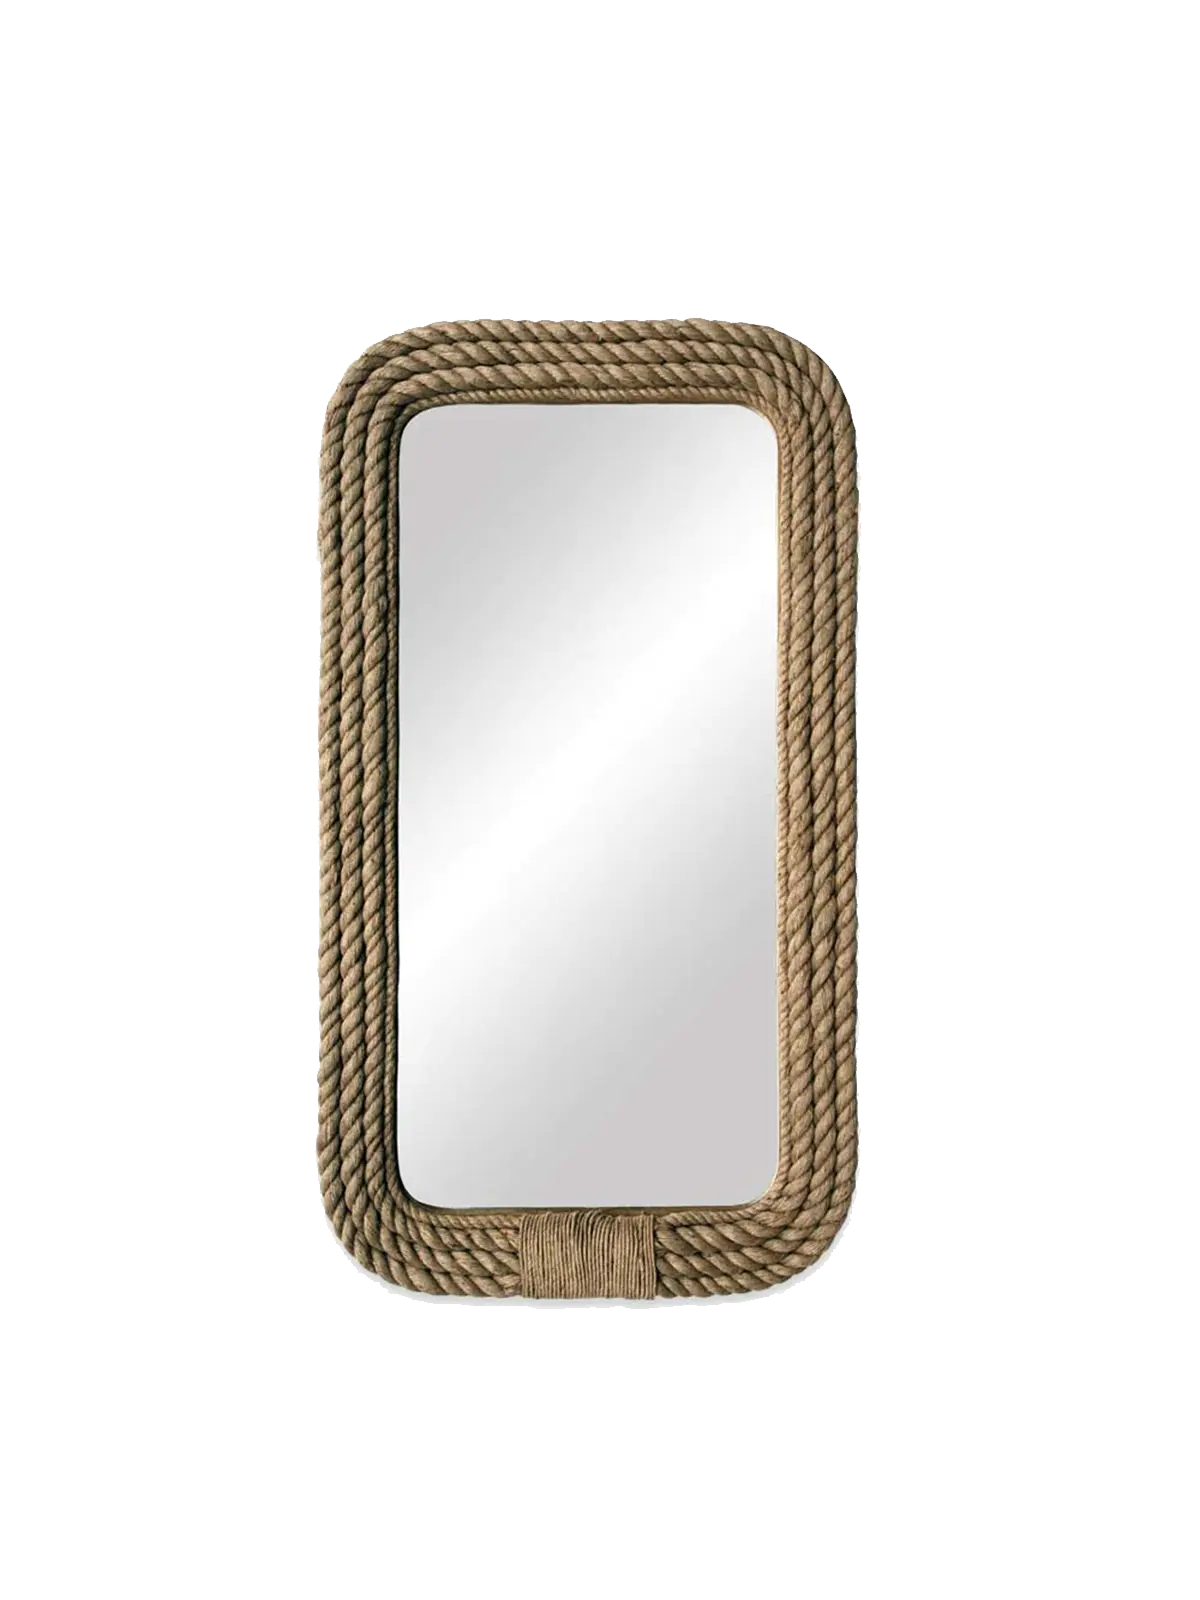 Lighthouse Rope Mirror Merchants and Traders by Sibella Court Pty Ltd